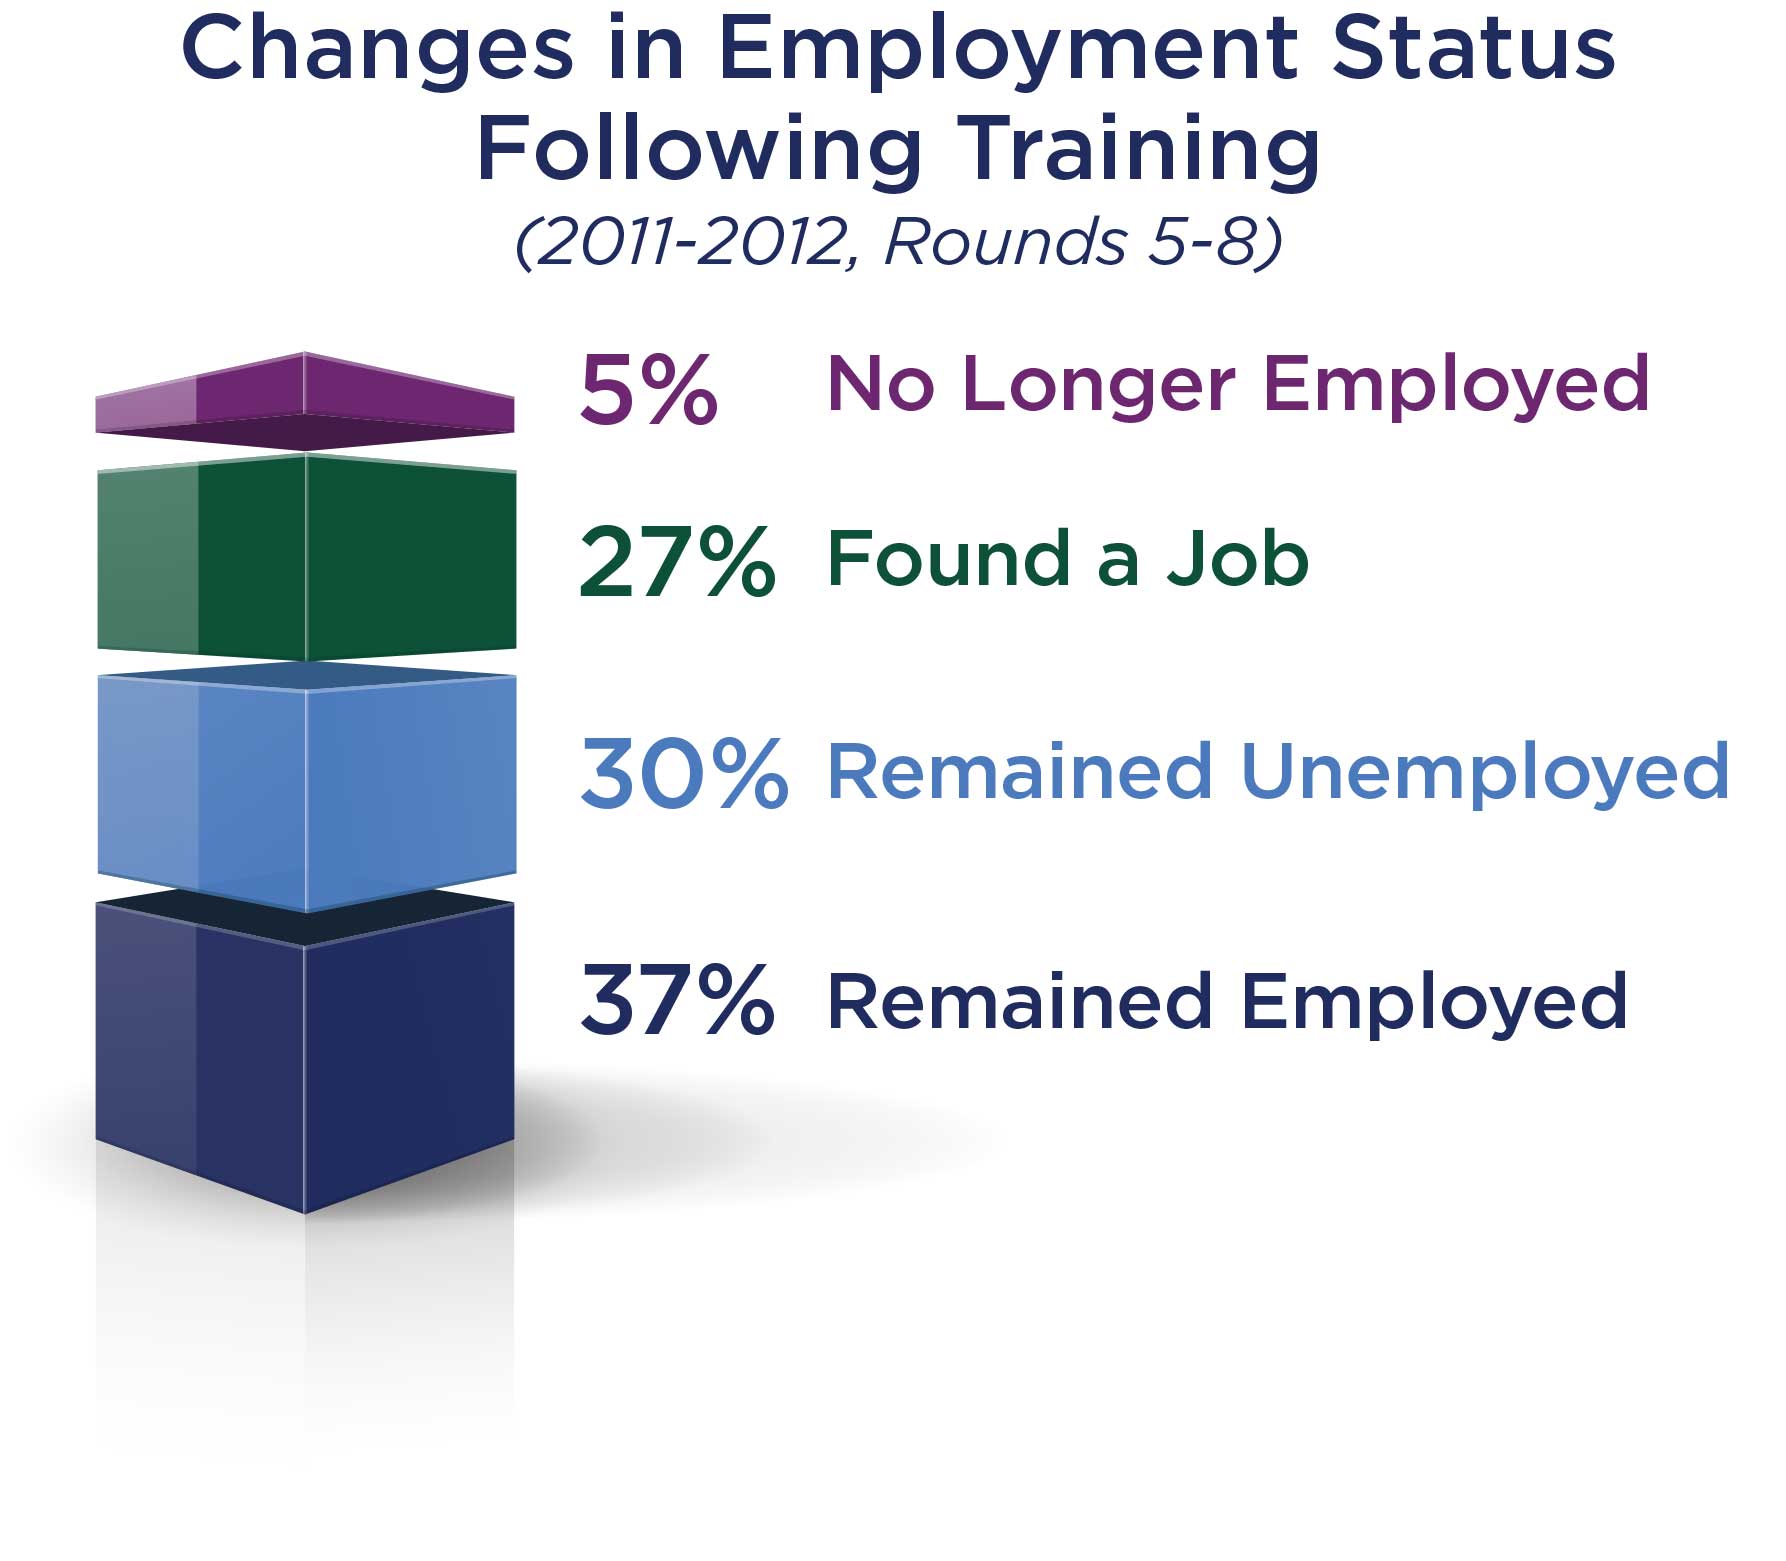 Changes in Employment Status Following Training